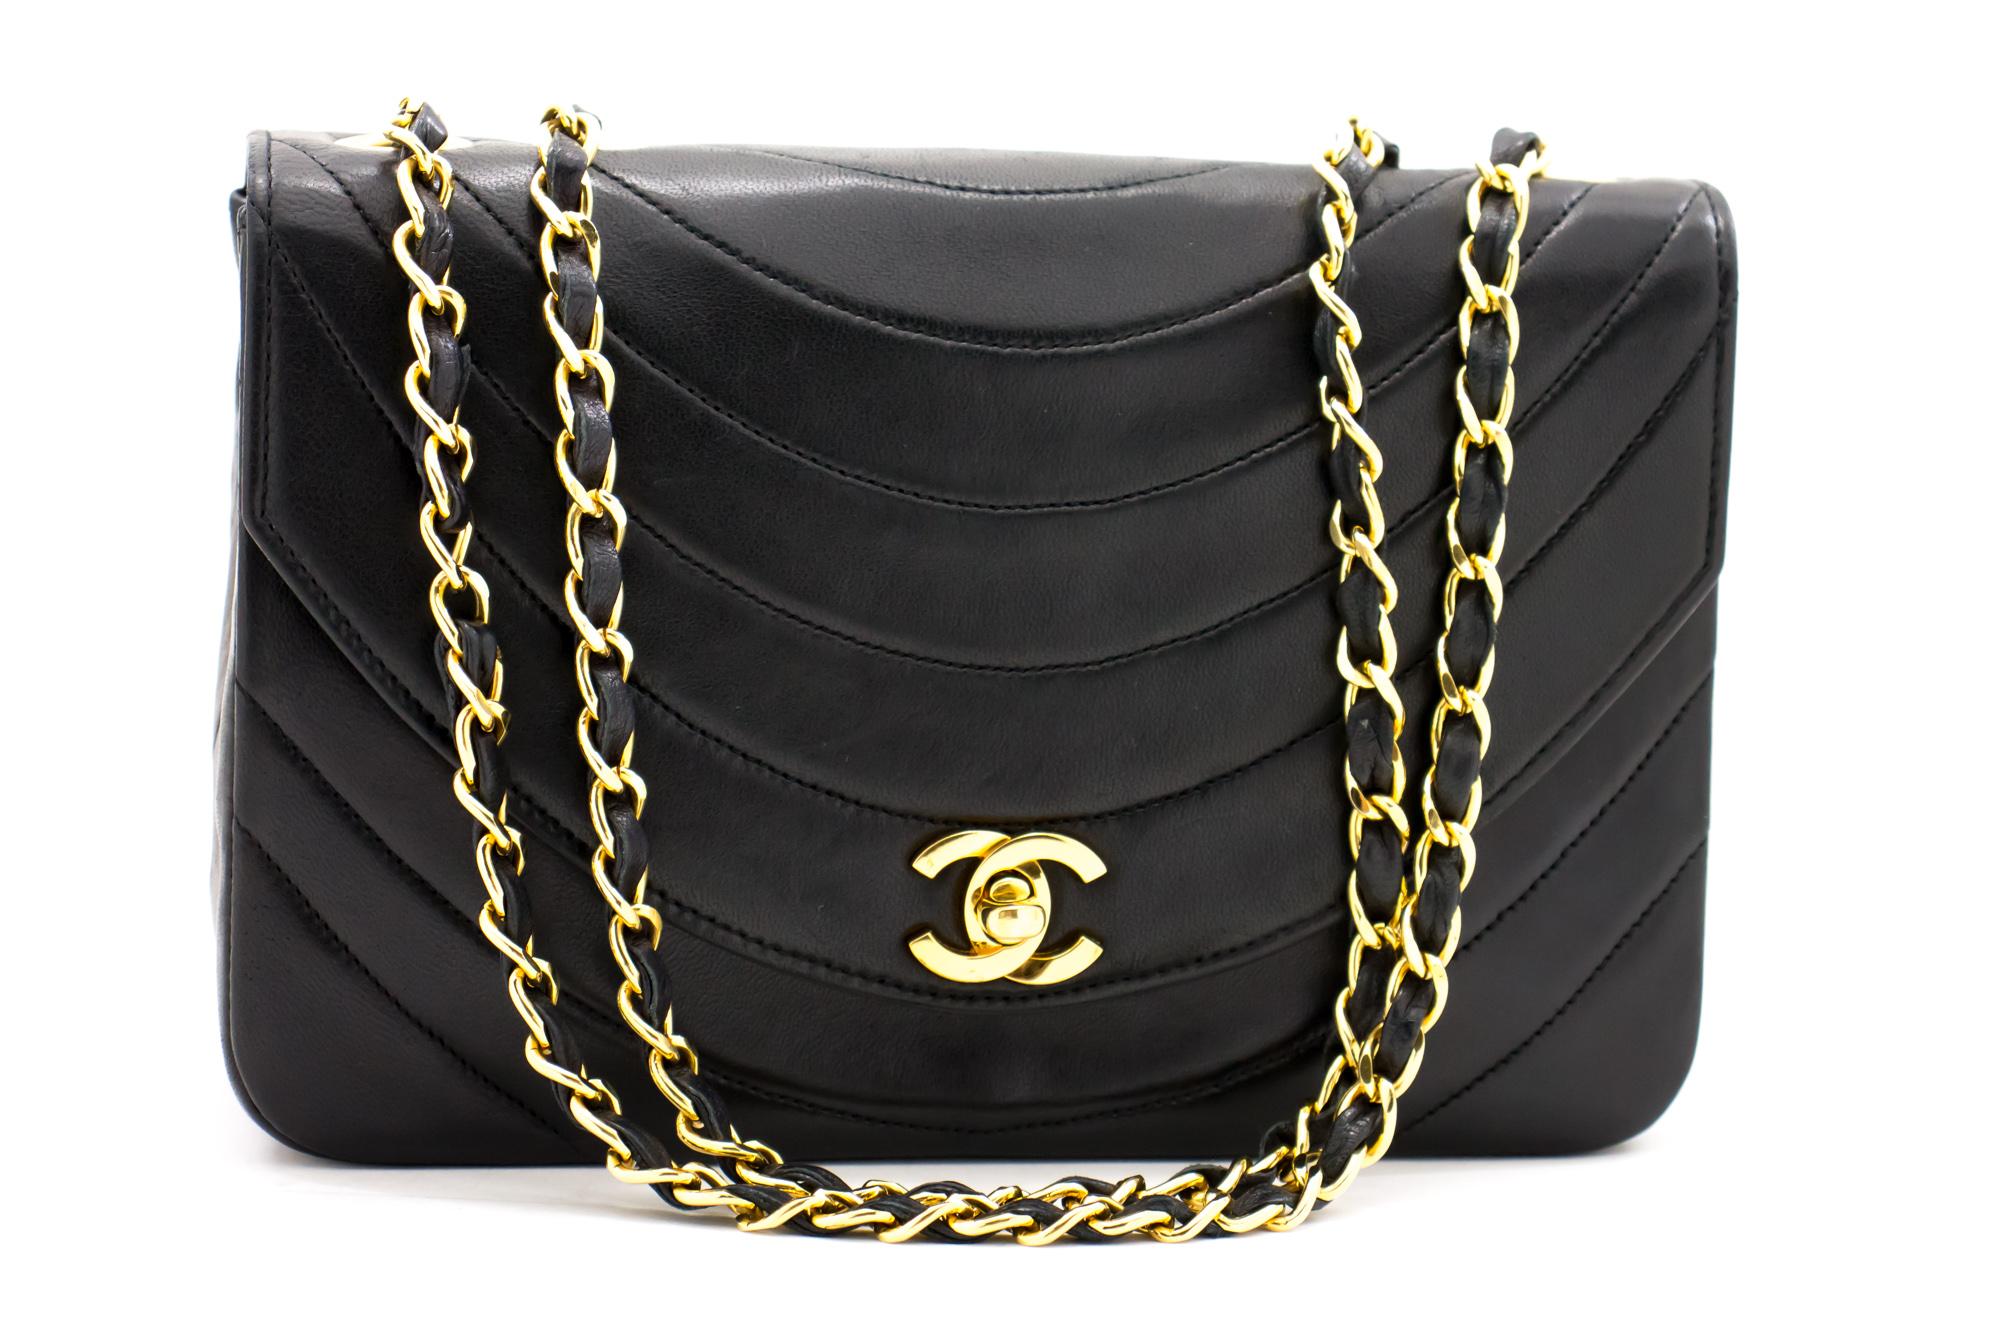 An authentic CHANEL Half Moon Chain Shoulder Bag Black Quilted Single Flap Lamb. The color is Black. The outside material is Leather. The pattern is Solid. This item is Vintage / Classic. The year of manufacture would be 1986-1988.
Conditions &